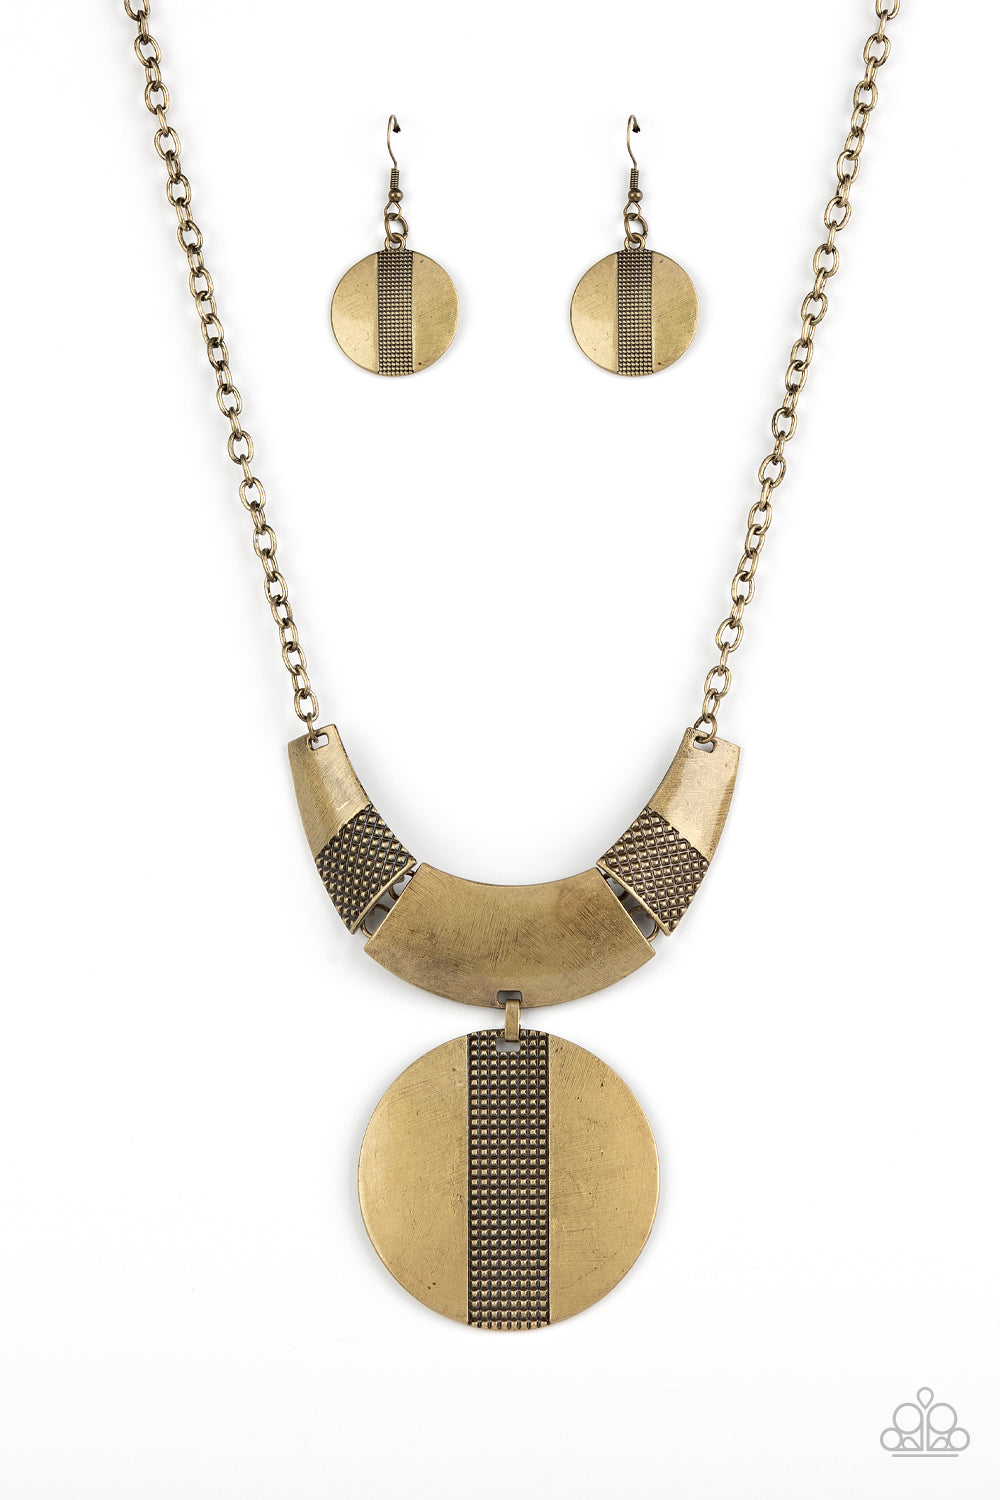 Metallic Enchantress Brass Necklace - Paparazzi Accessories  Three wide, curved brass bars, stamped in studded textured accents, connect to a brass chain across the collar. A substantial brass disc, divided down the center with texture, swings from the bottom resulting in an edgy modern finish. Features an adjustable clasp closure.  Sold as one individual necklace. Includes one pair of matching earrings.